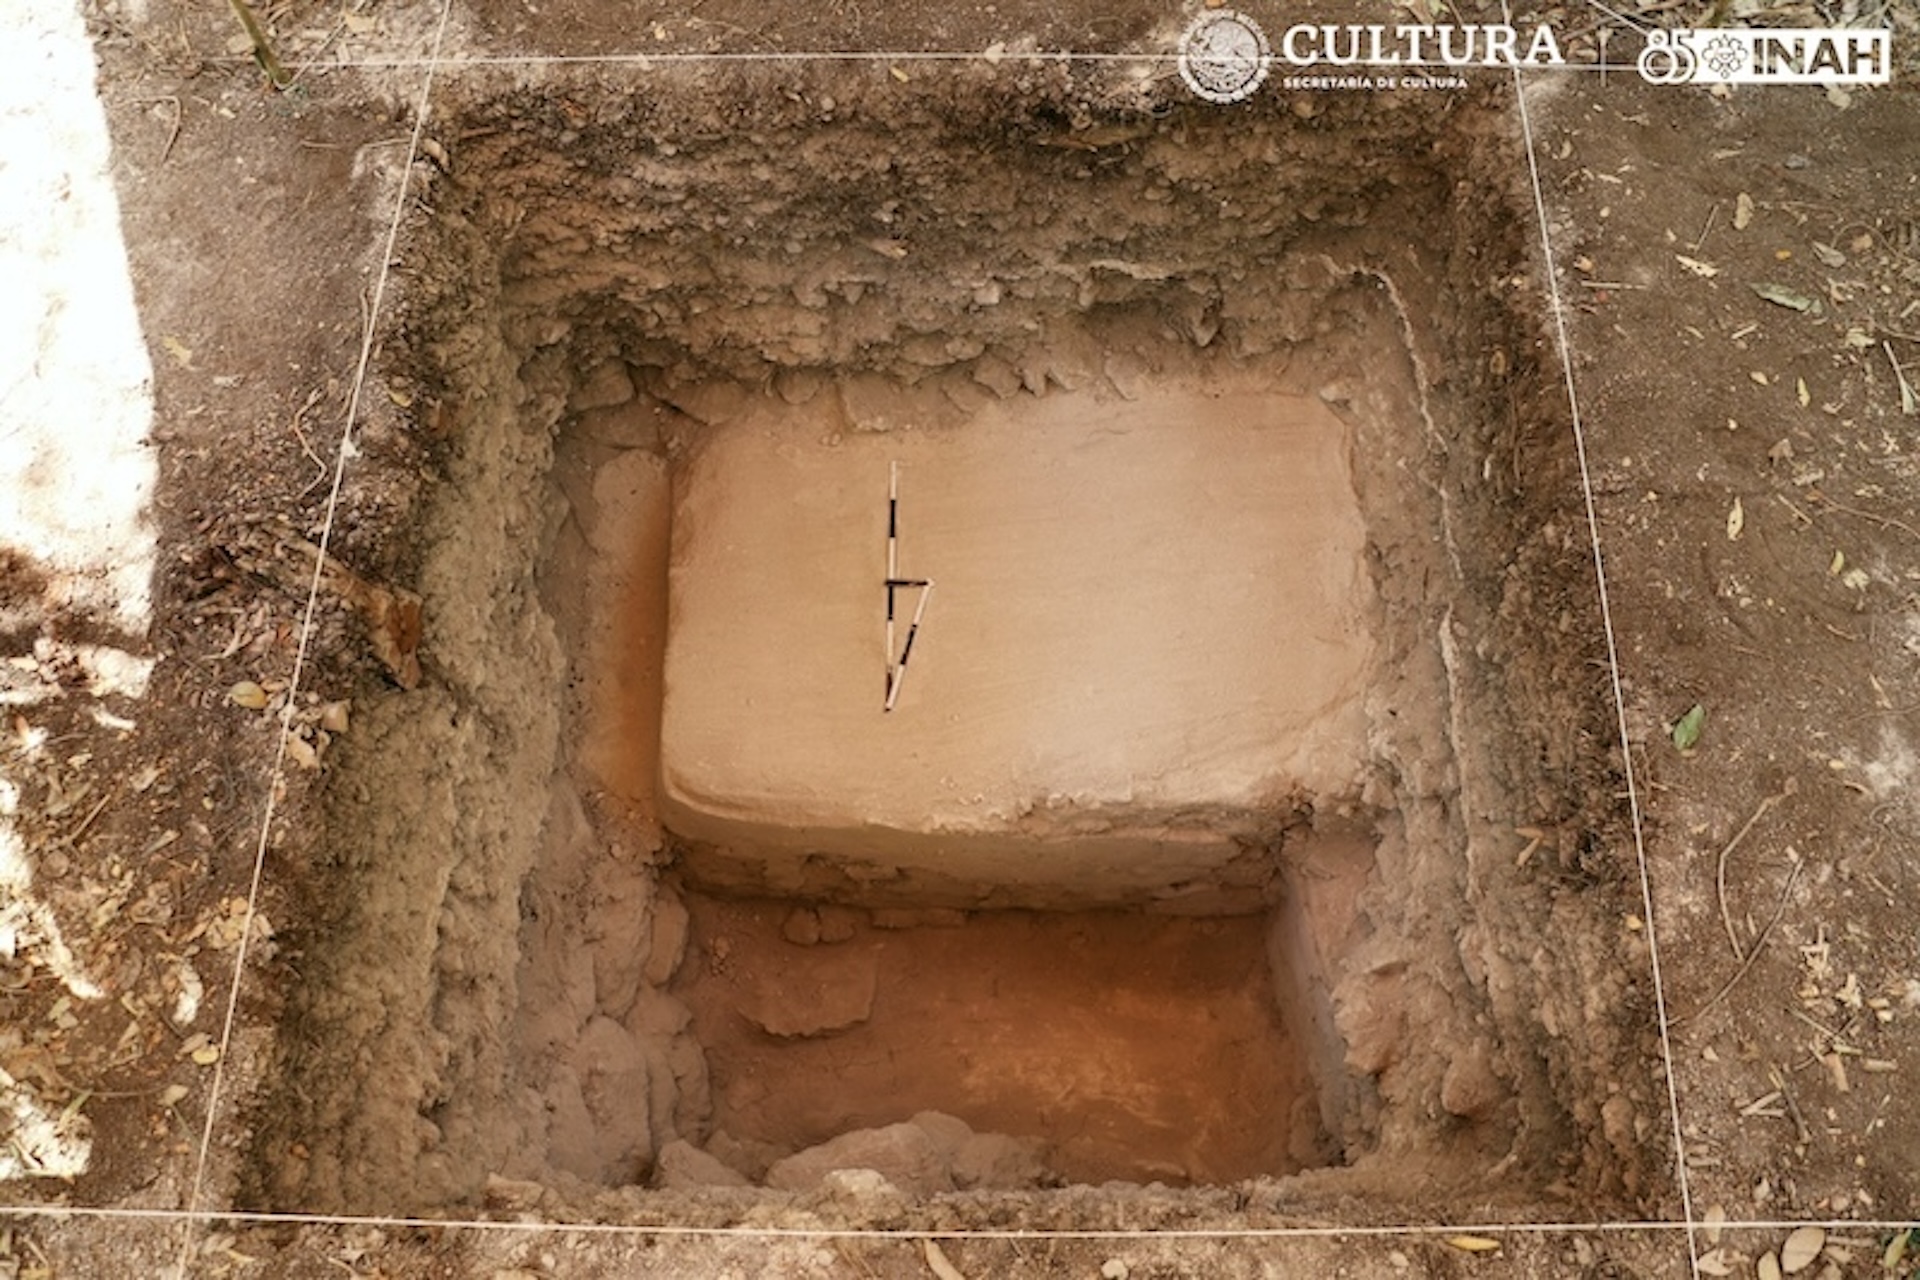 A rectangular hole excavated from the ground